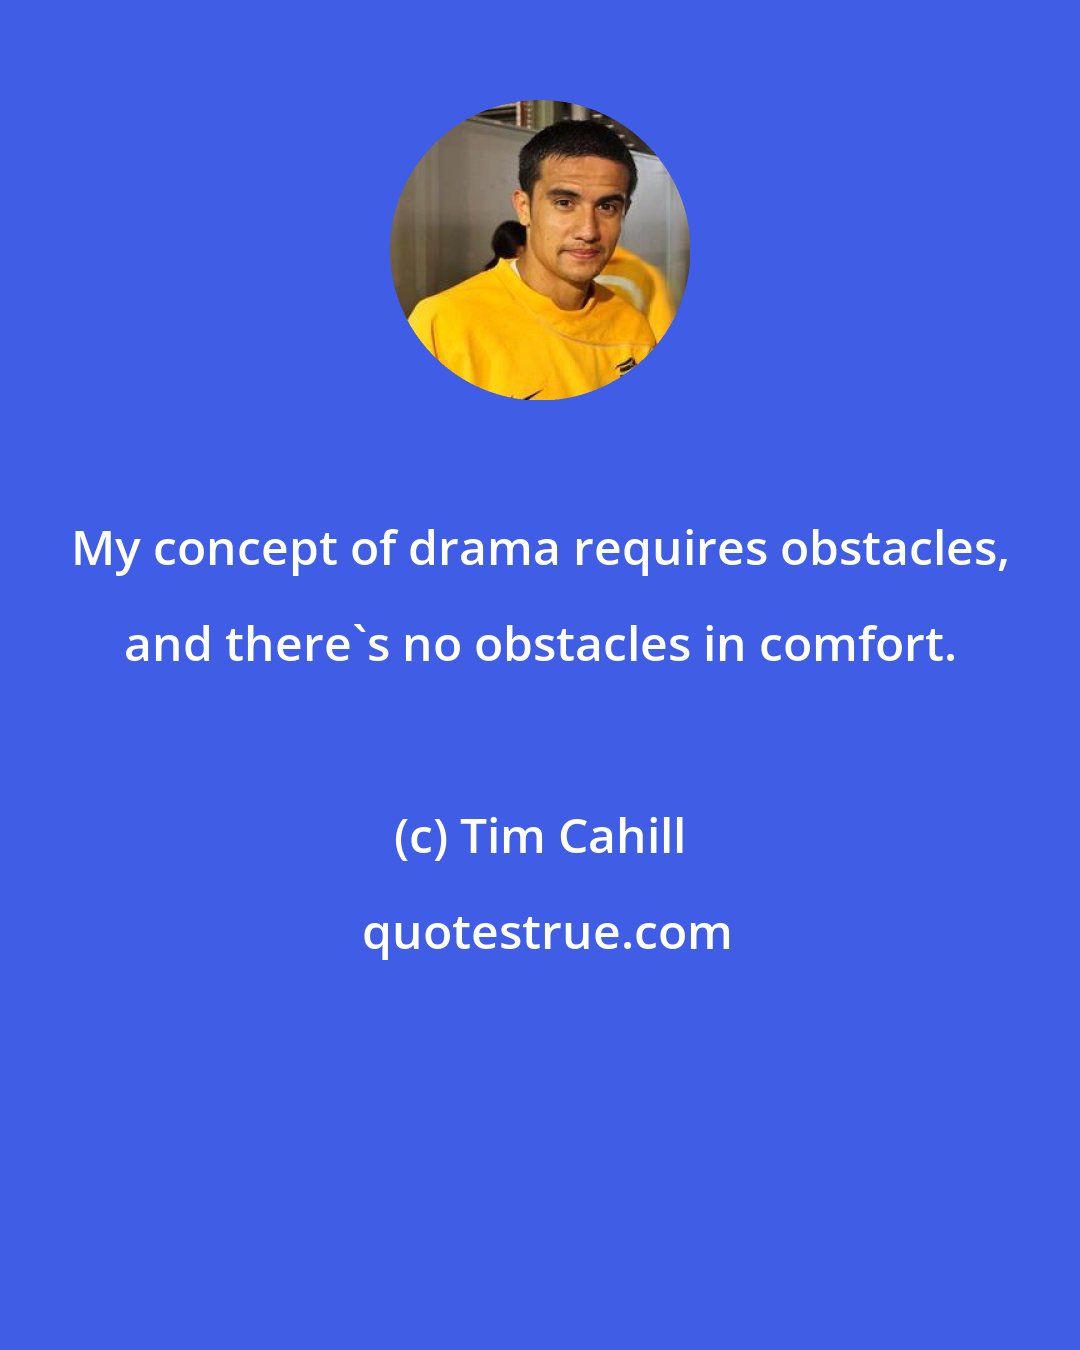 Tim Cahill: My concept of drama requires obstacles, and there's no obstacles in comfort.